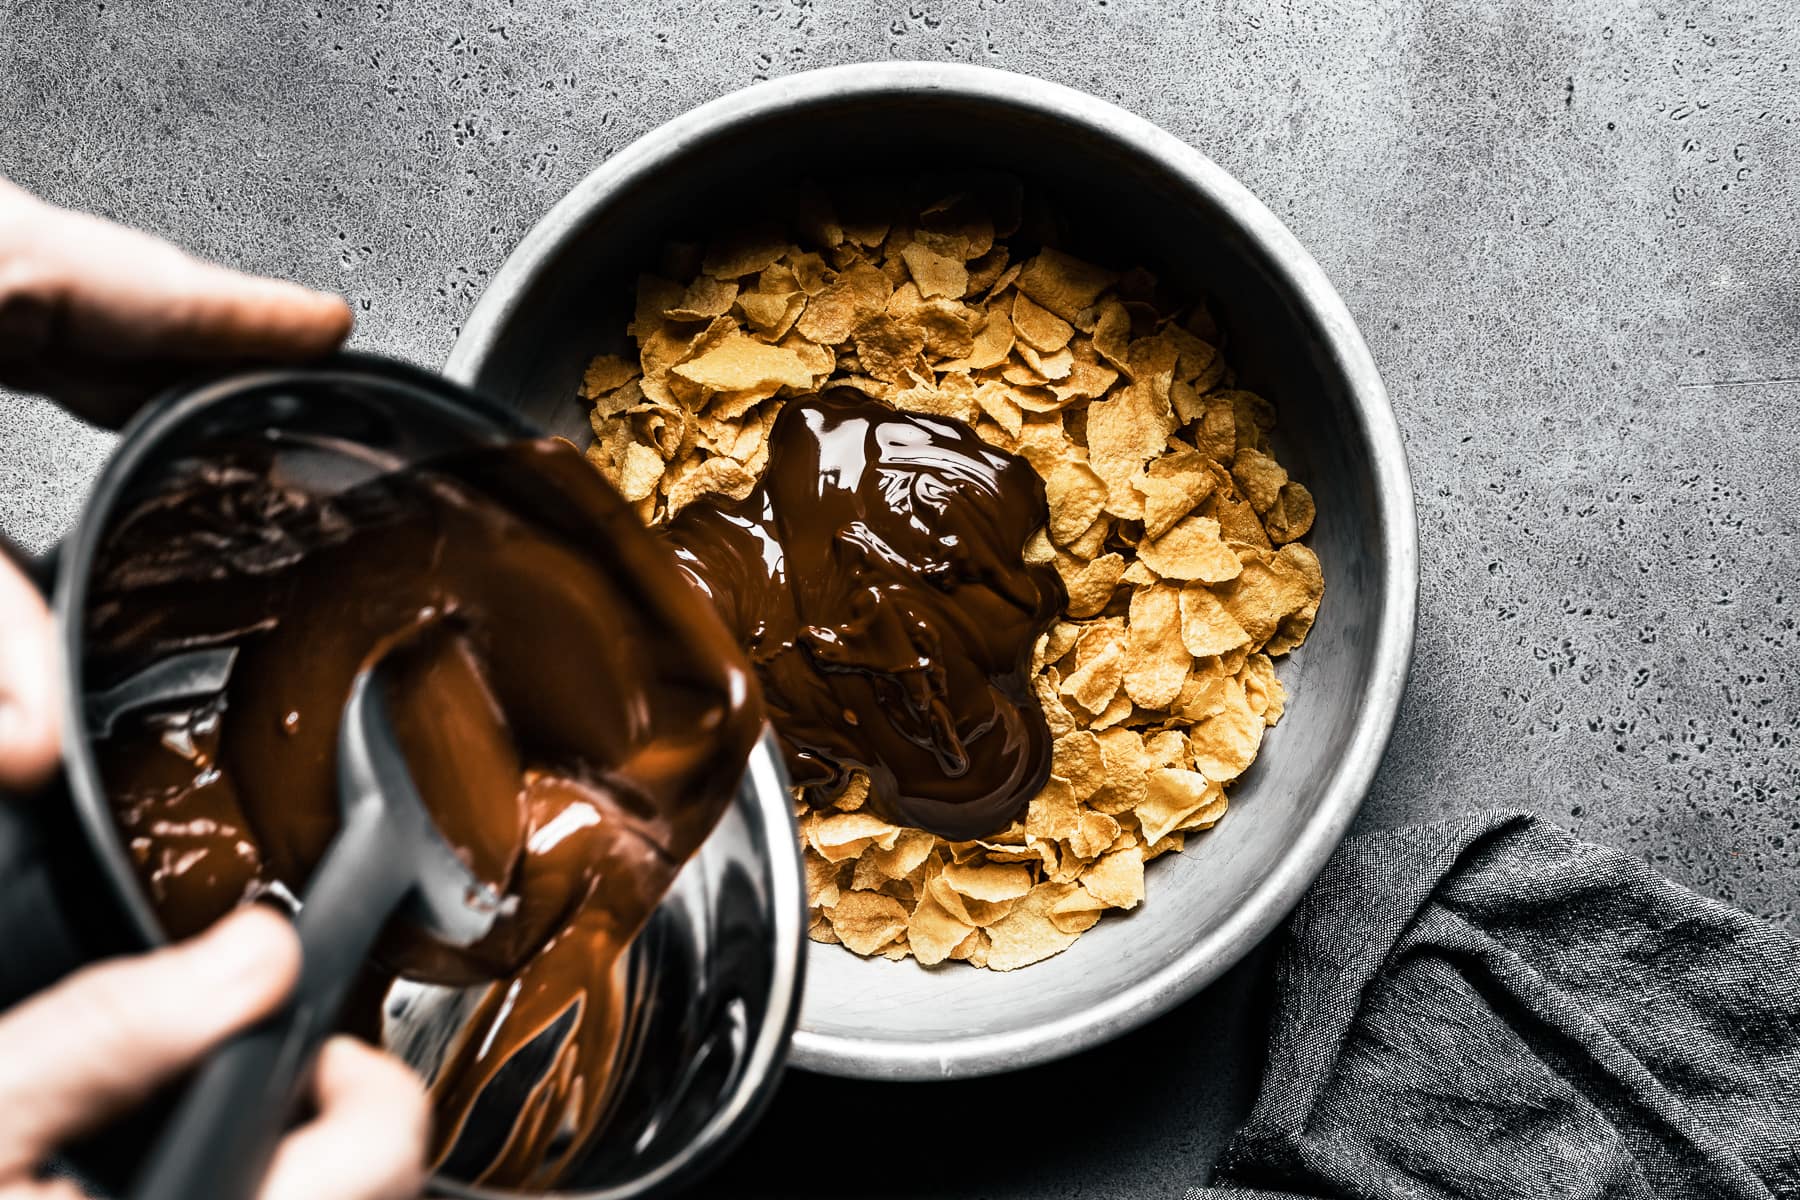 A process photo showing a bowl of melted chocolate being poured onto a larger bowl of cornflakes. The bowl of cereal rests on a grey stone surface with a grey napkin nearby.